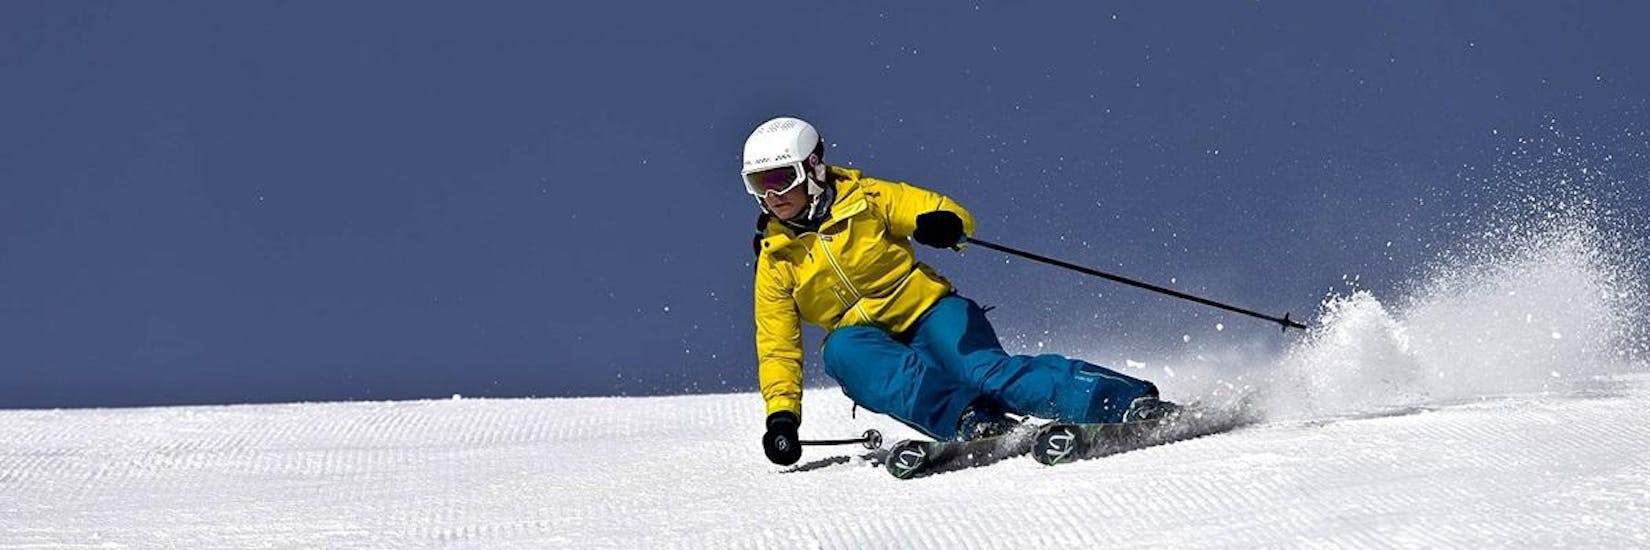 Private Ski Lessons for Adults "Refresh" for all Levels.